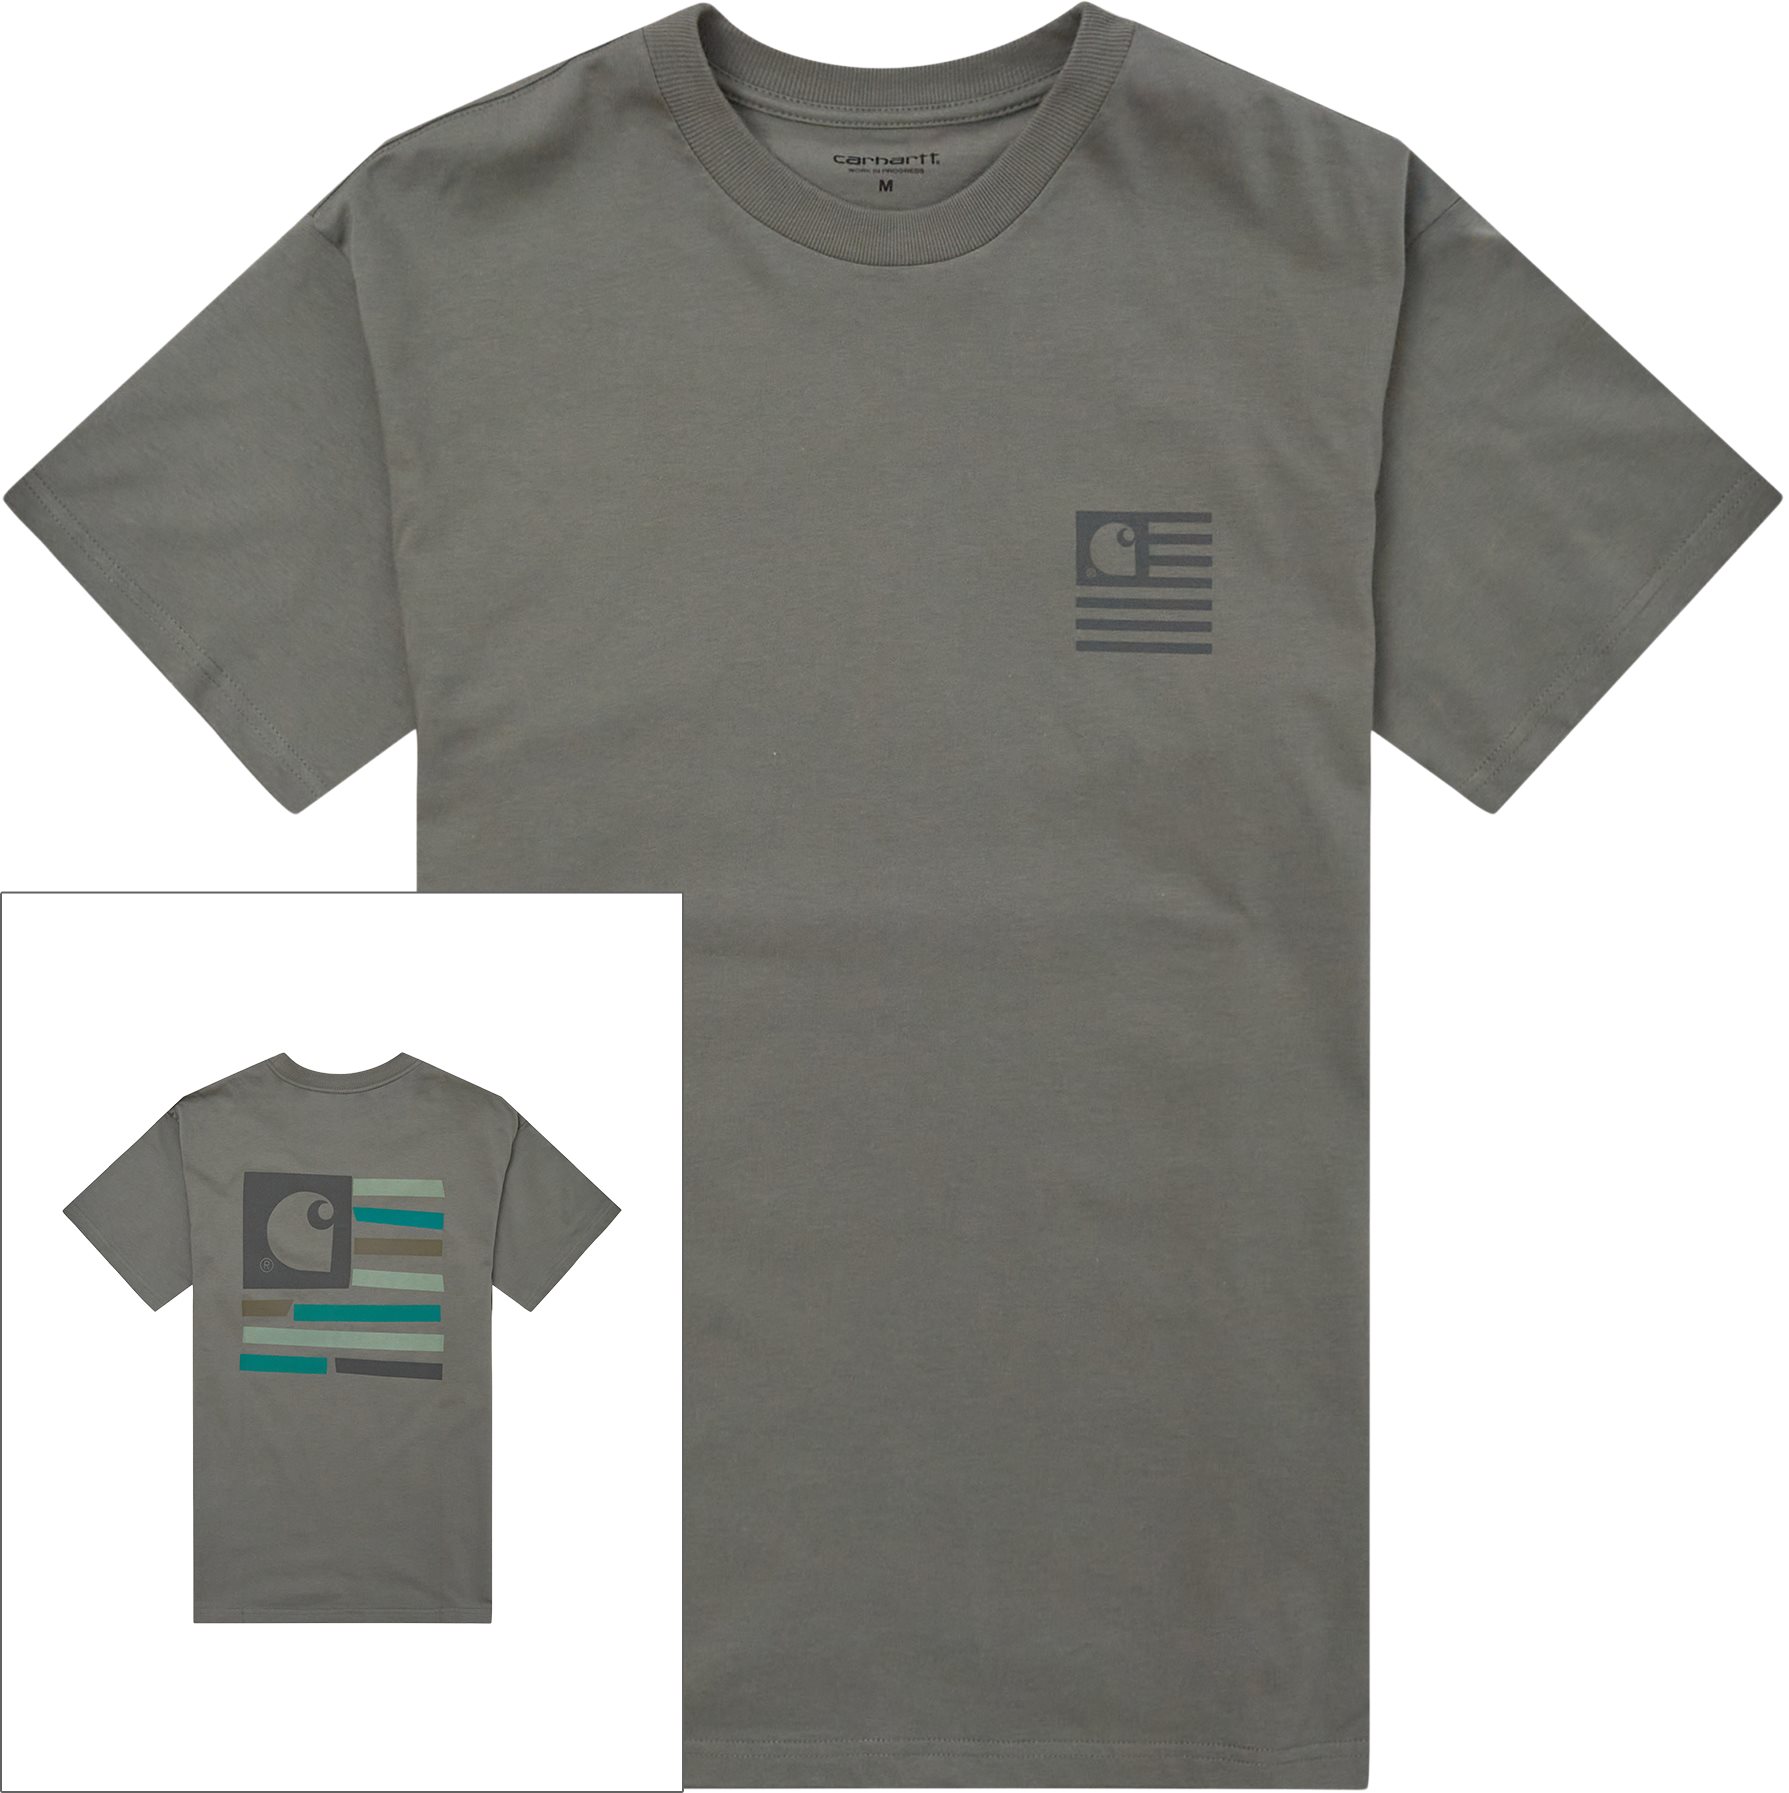 Medley State Tee - T-shirts - Loose fit - Green